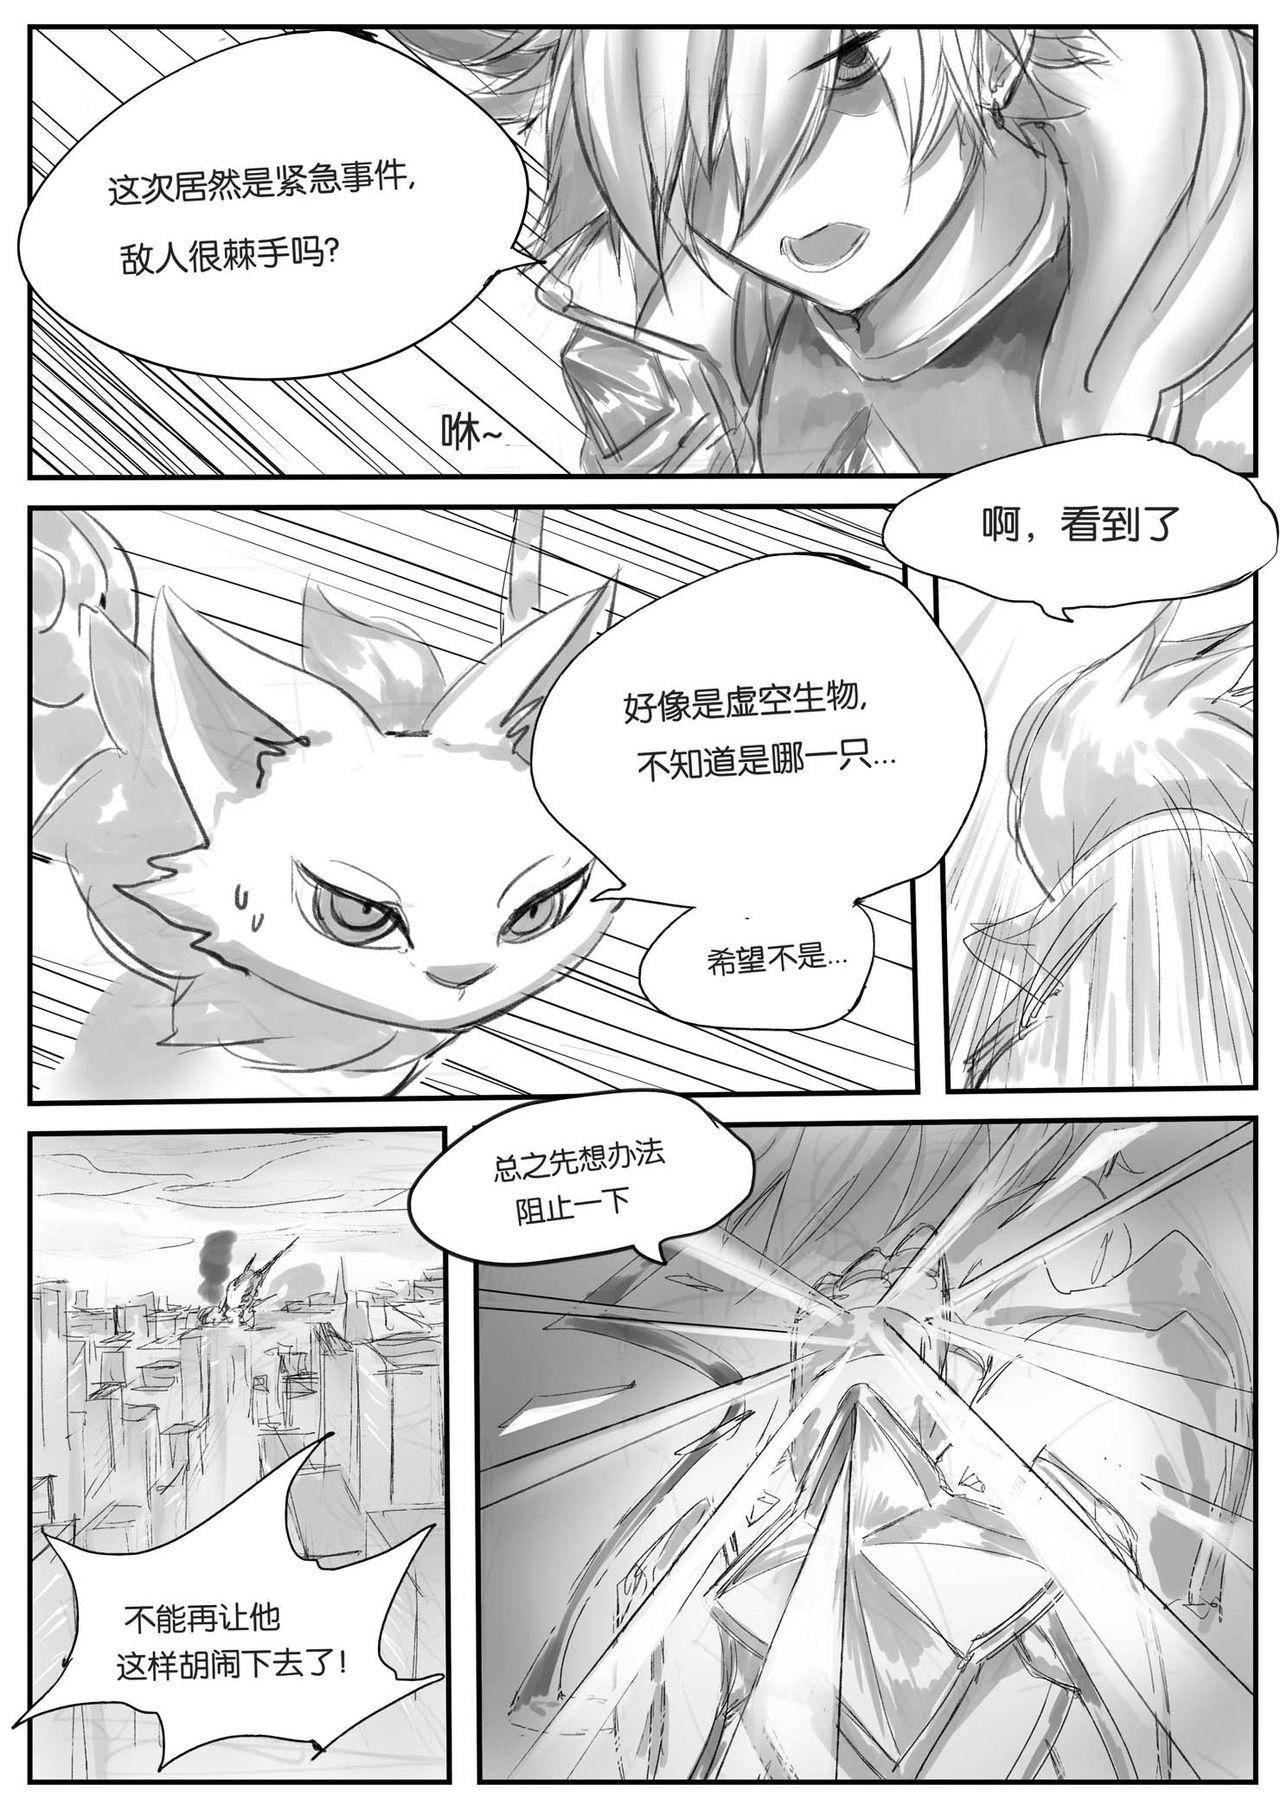 Homemade 守护者之Xing - League of legends Assfucking - Page 10